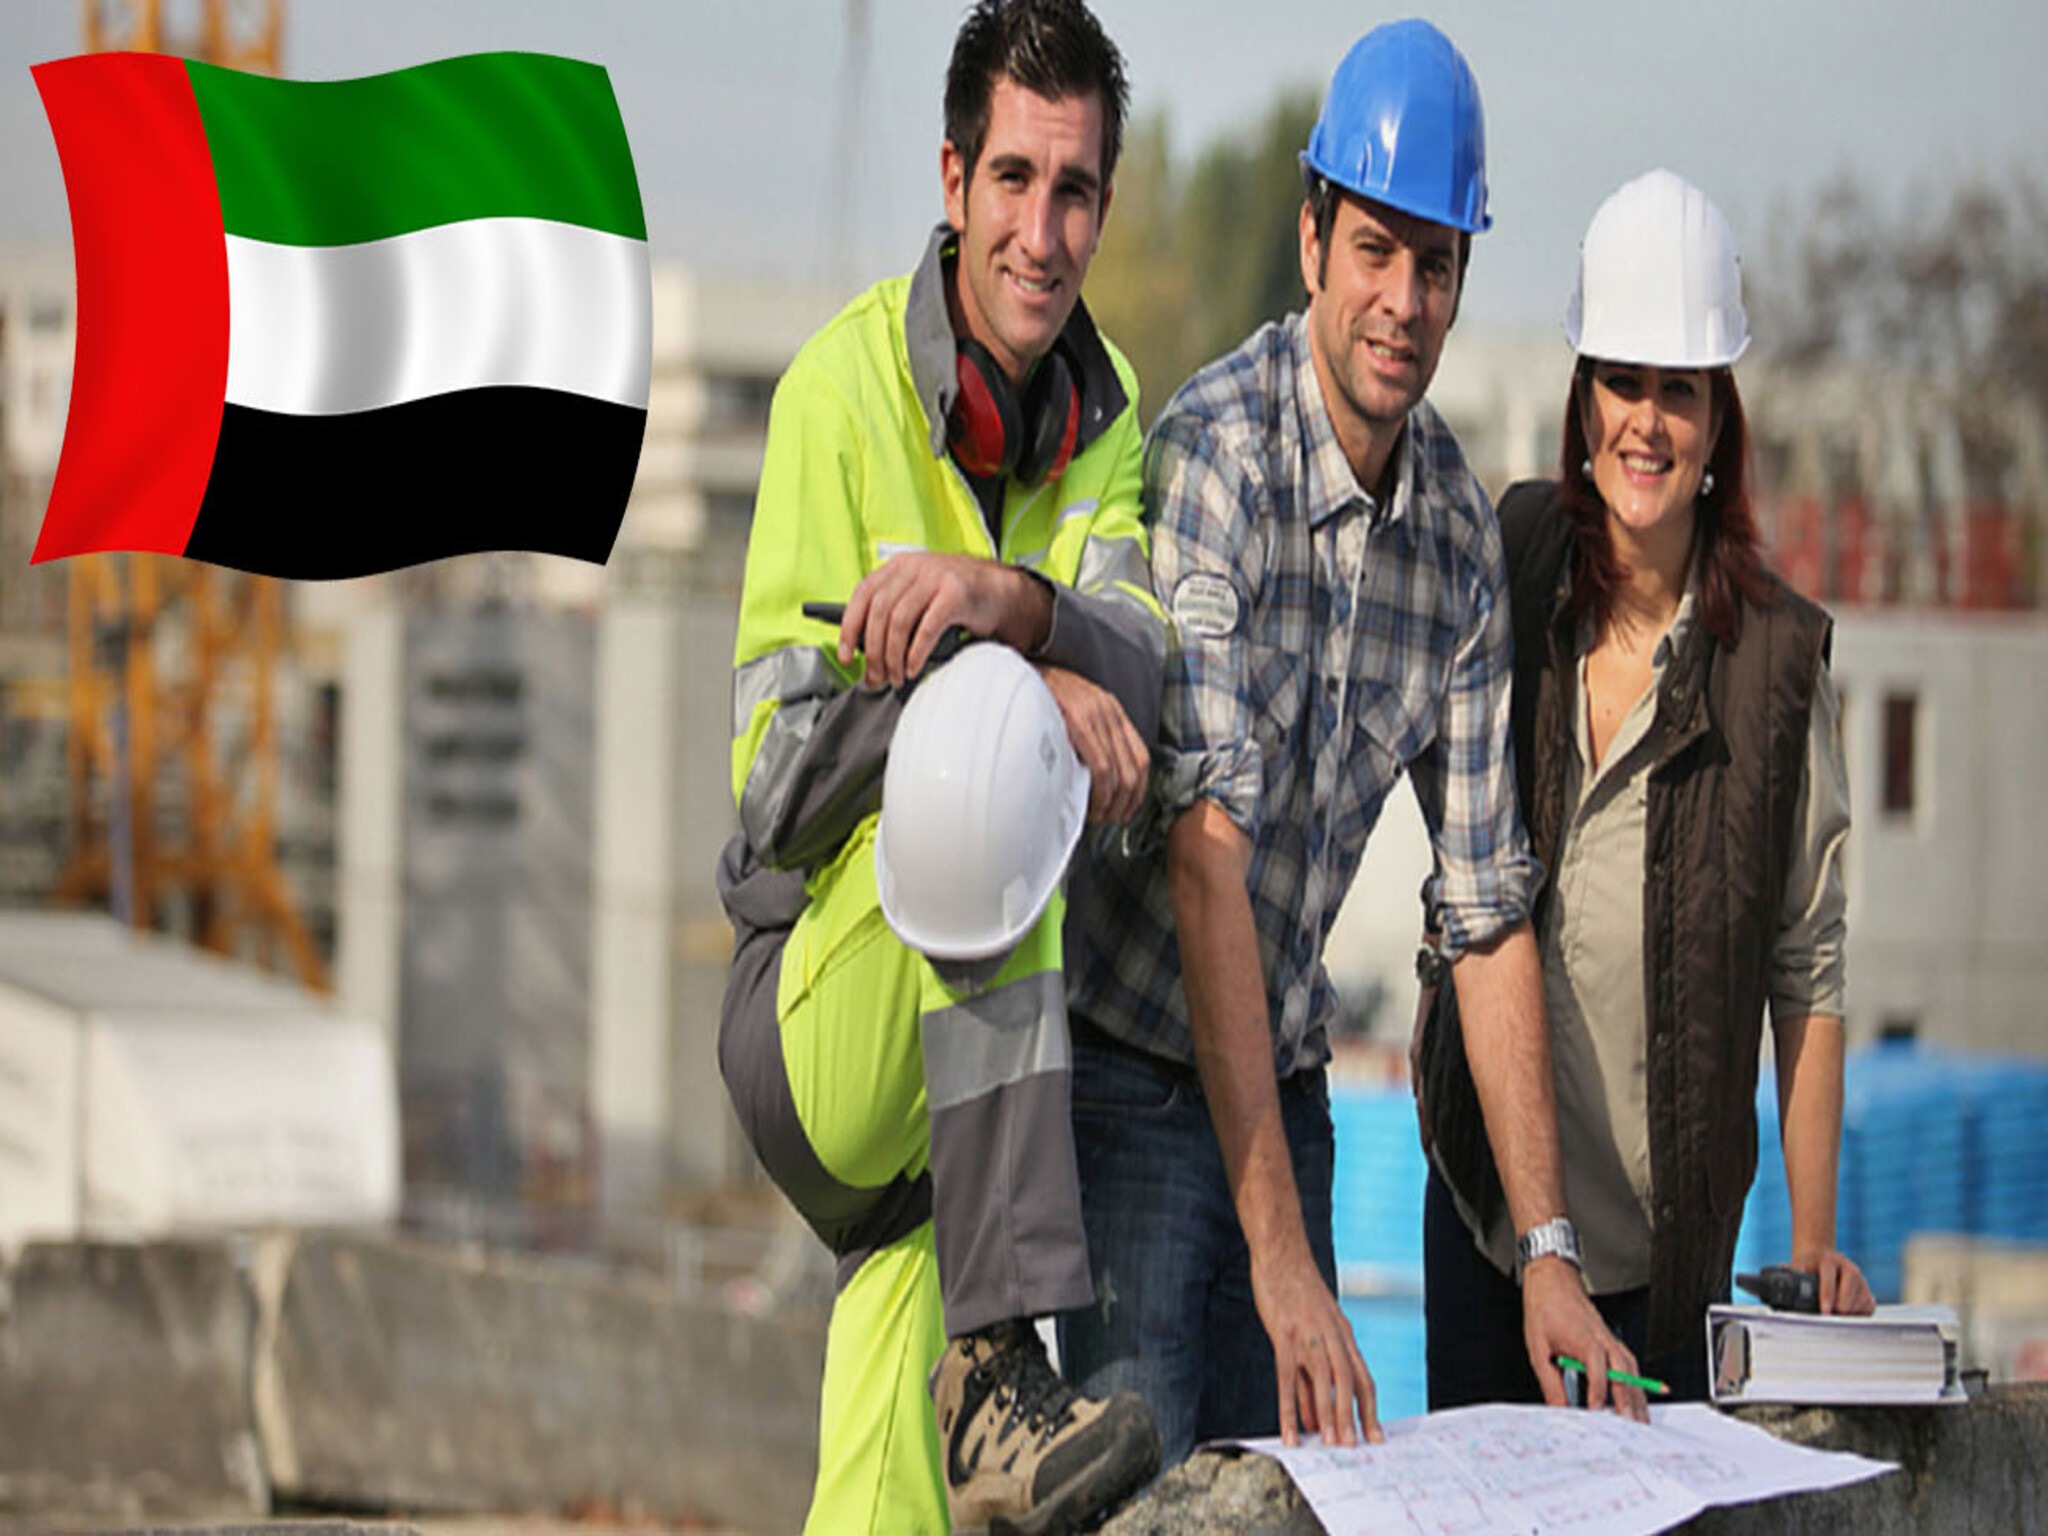 The UAE sets 4 main conditions for classifying skilled resident workers